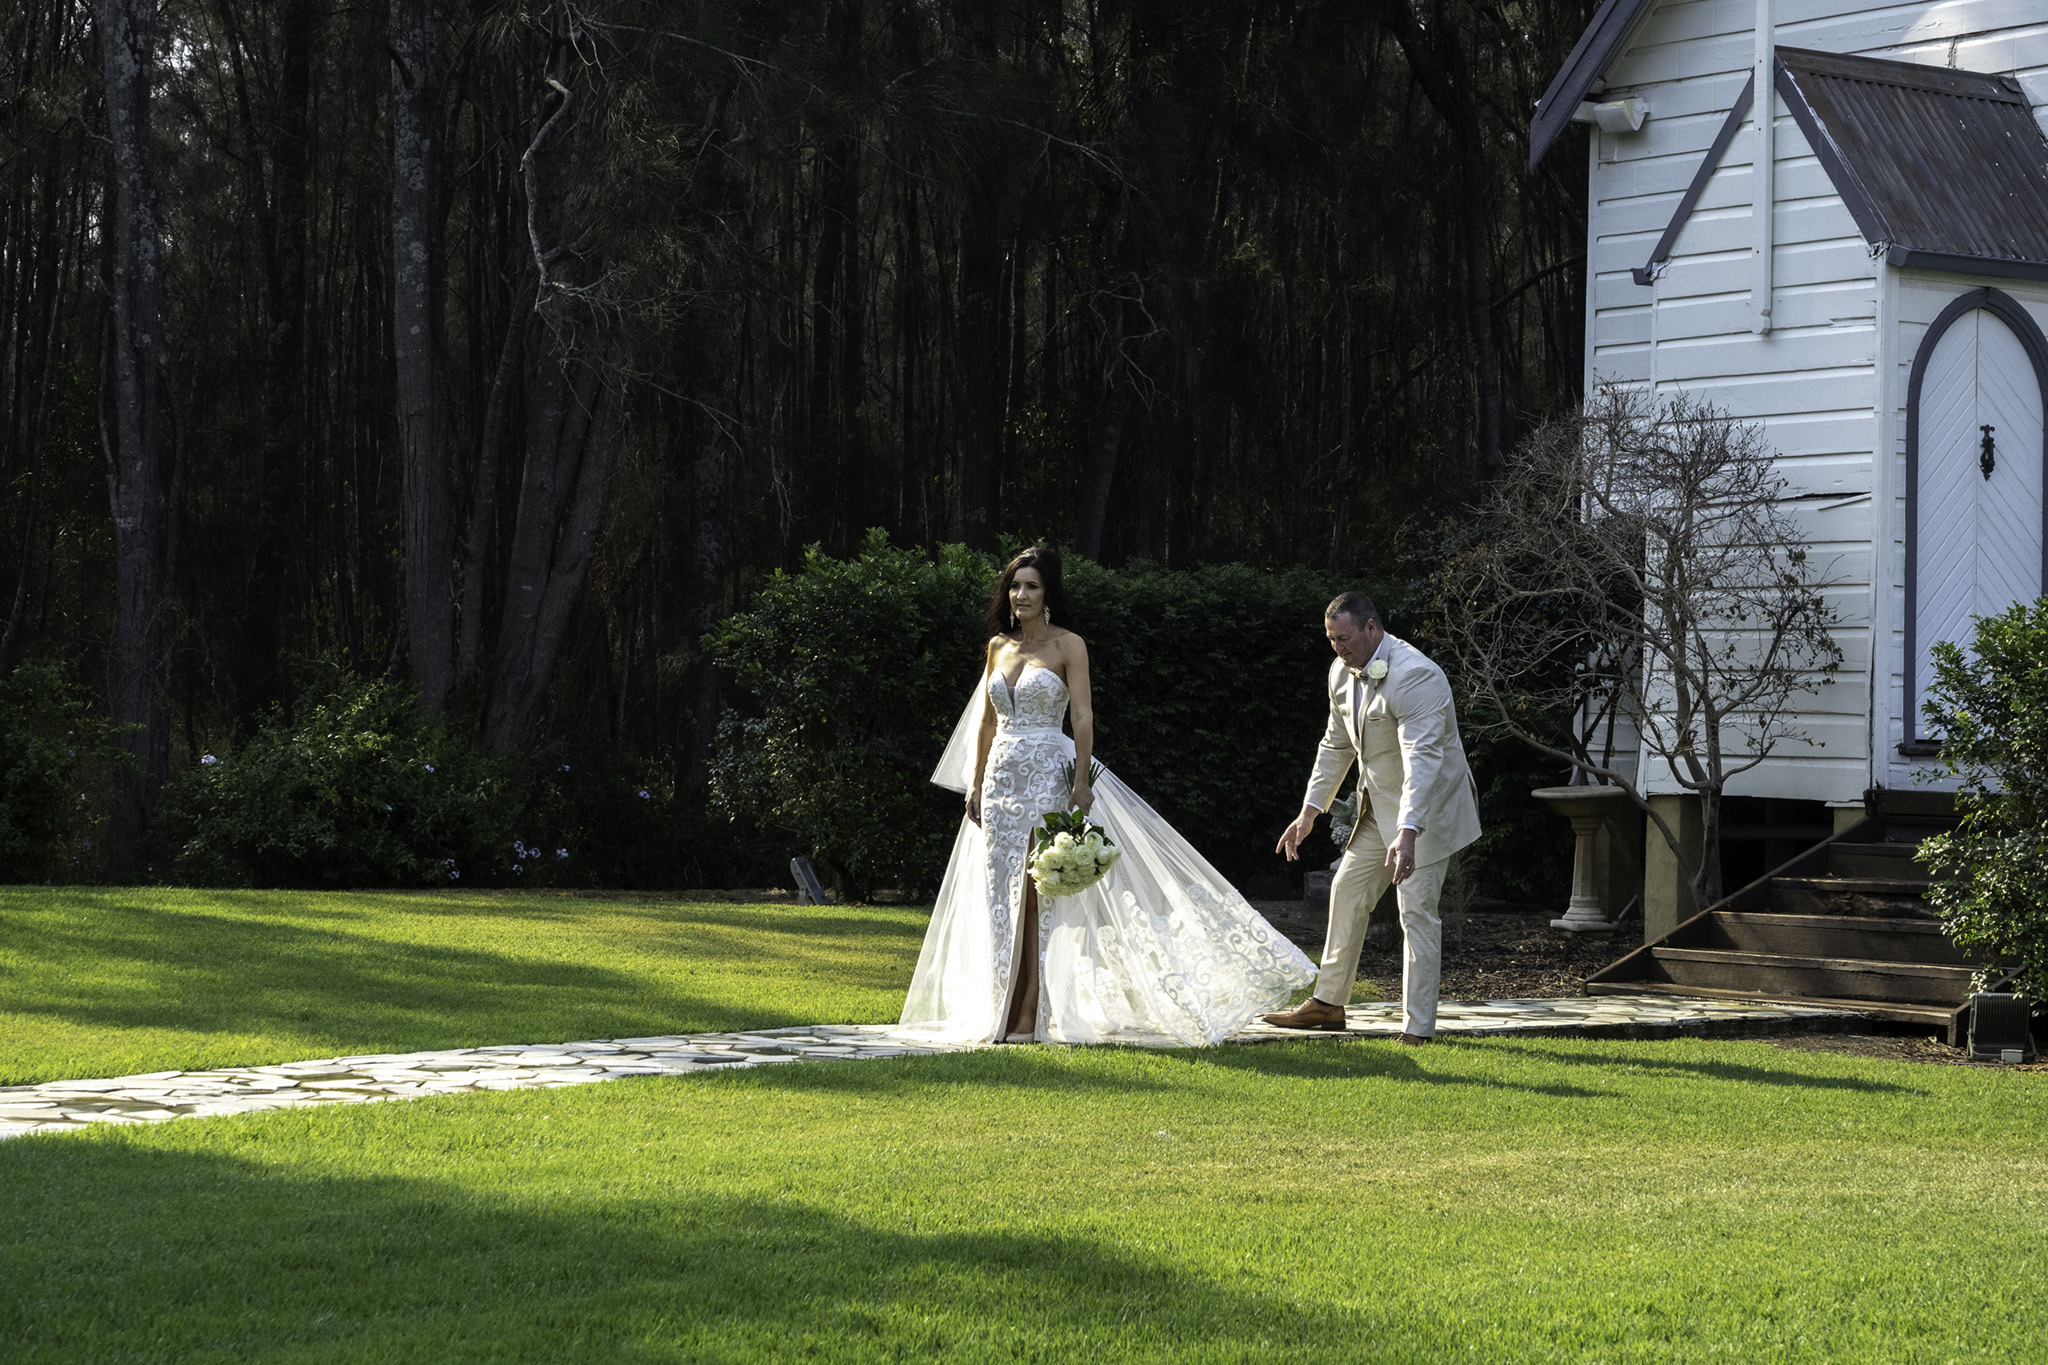 ArtyJ Photography | Spring Elopement, Pokolbin, Country Elopement Packages NSW, NSW, Hunter Valley Elopement, Hunter Valley, Elope Hunter Valley, Peppers Convent, Hunter Valley Wedding Photographer, Elope, Circa 1876, Elopement | Rebecca & Denis | Elopement